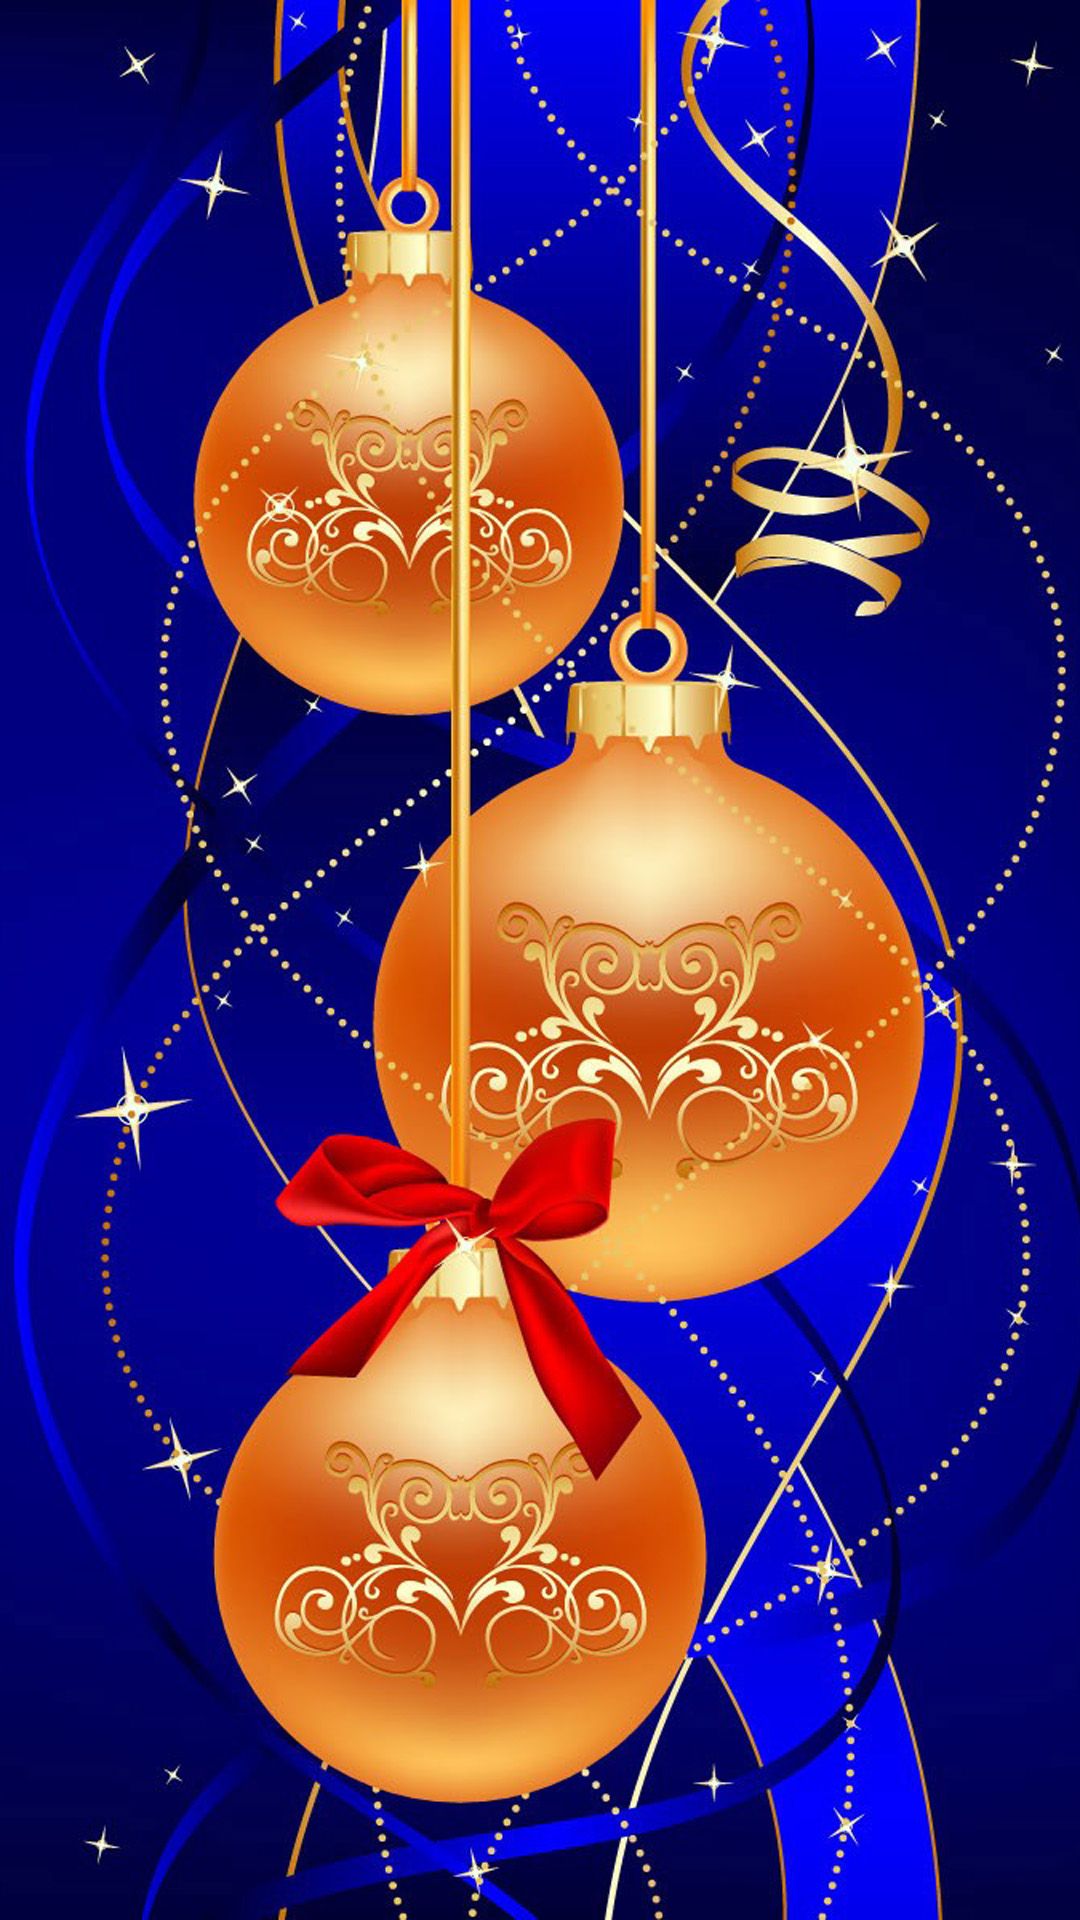 Merry Christmas Ball iPhone 6 Wallpaper Download. iPhone Wallpaper, iPad wallpaper O. Wallpaper iphone christmas, Christmas wallpaper, Christmas wallpaper free